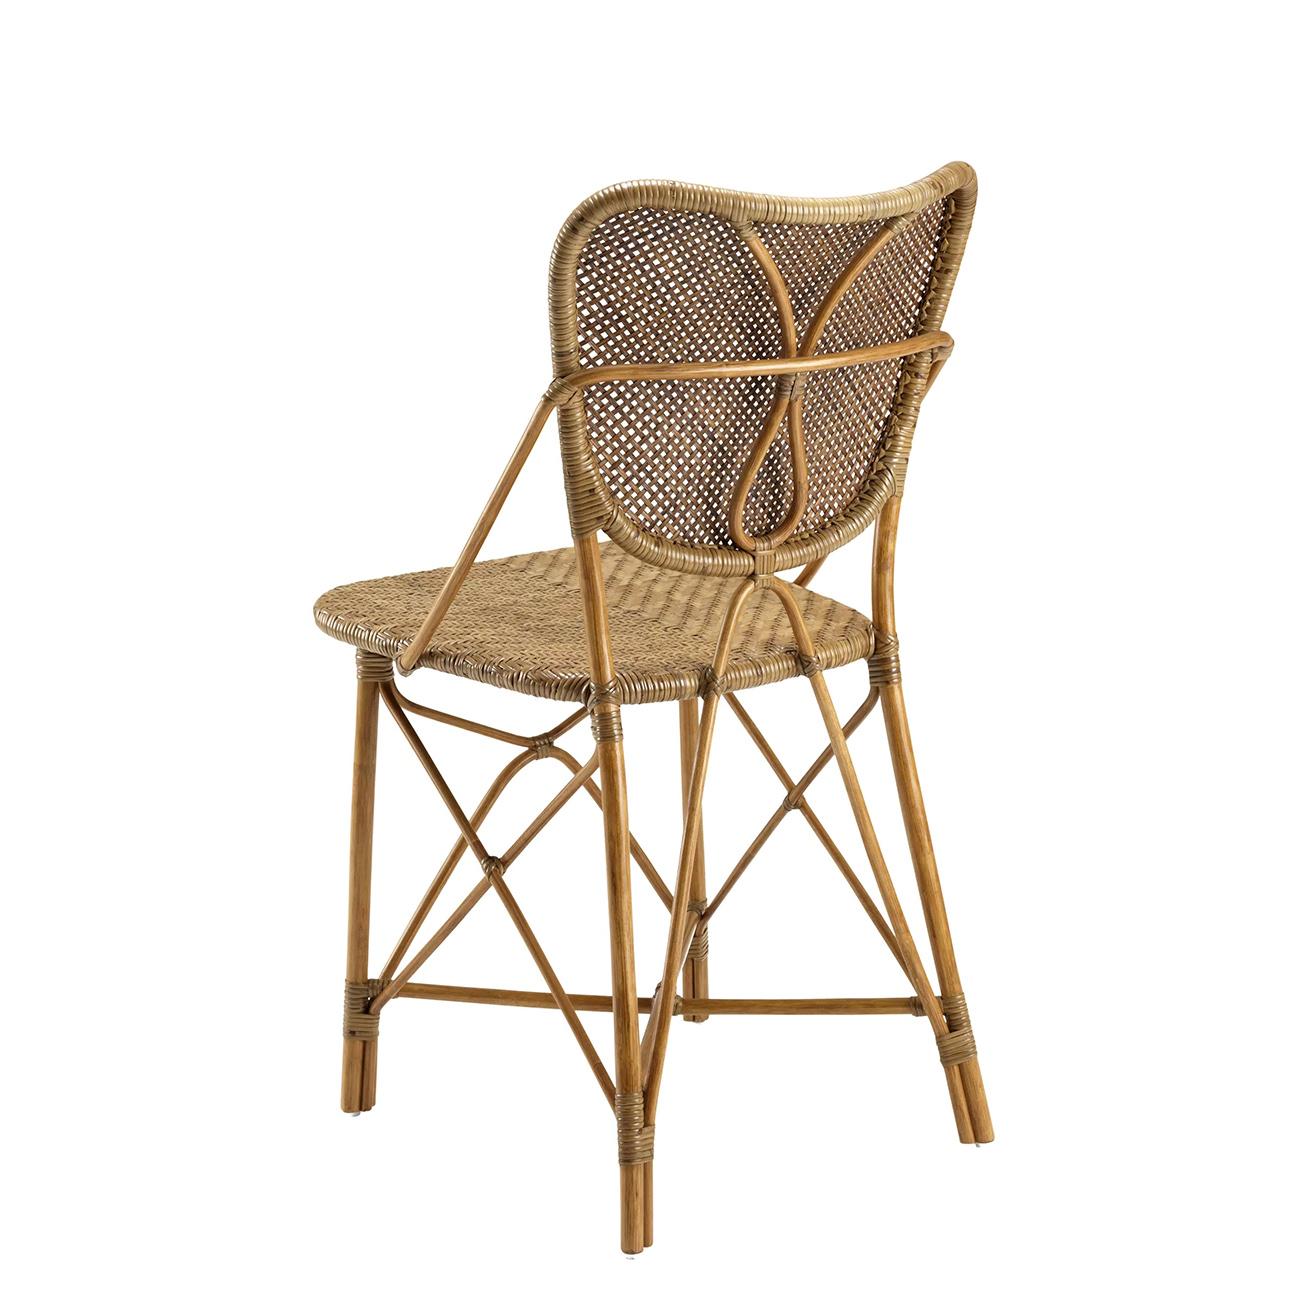 Hand-Crafted Rattan Style Chair For Sale